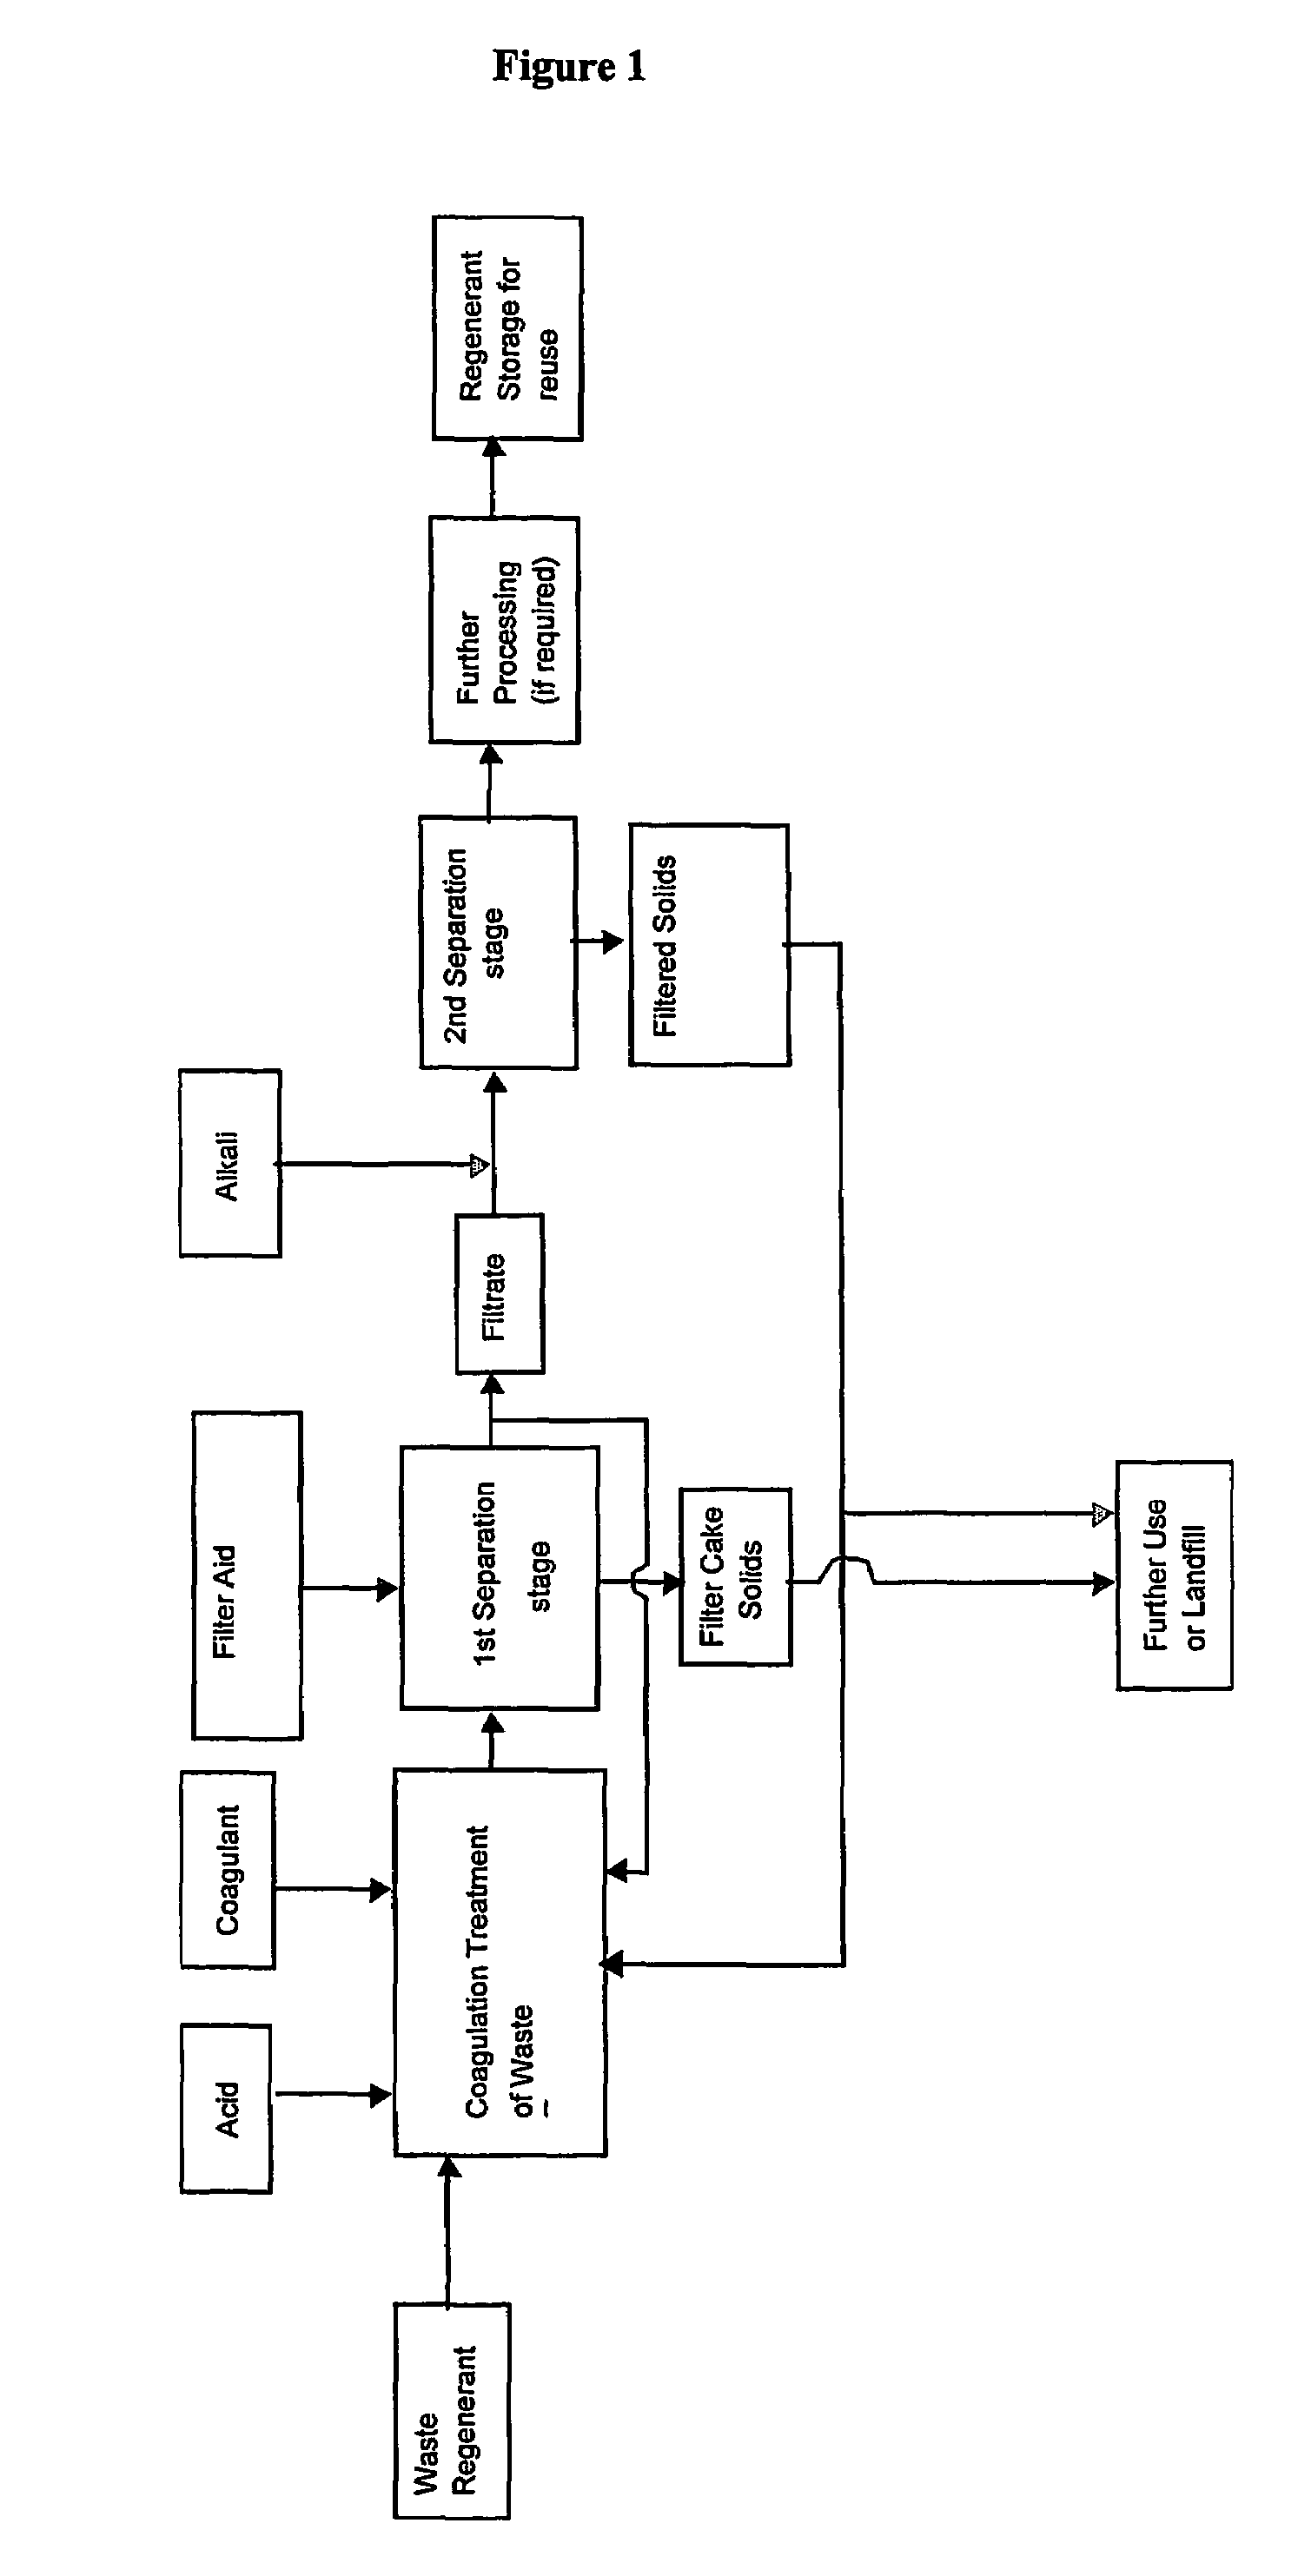 Process for treating concentrated salt solutions containing DOC